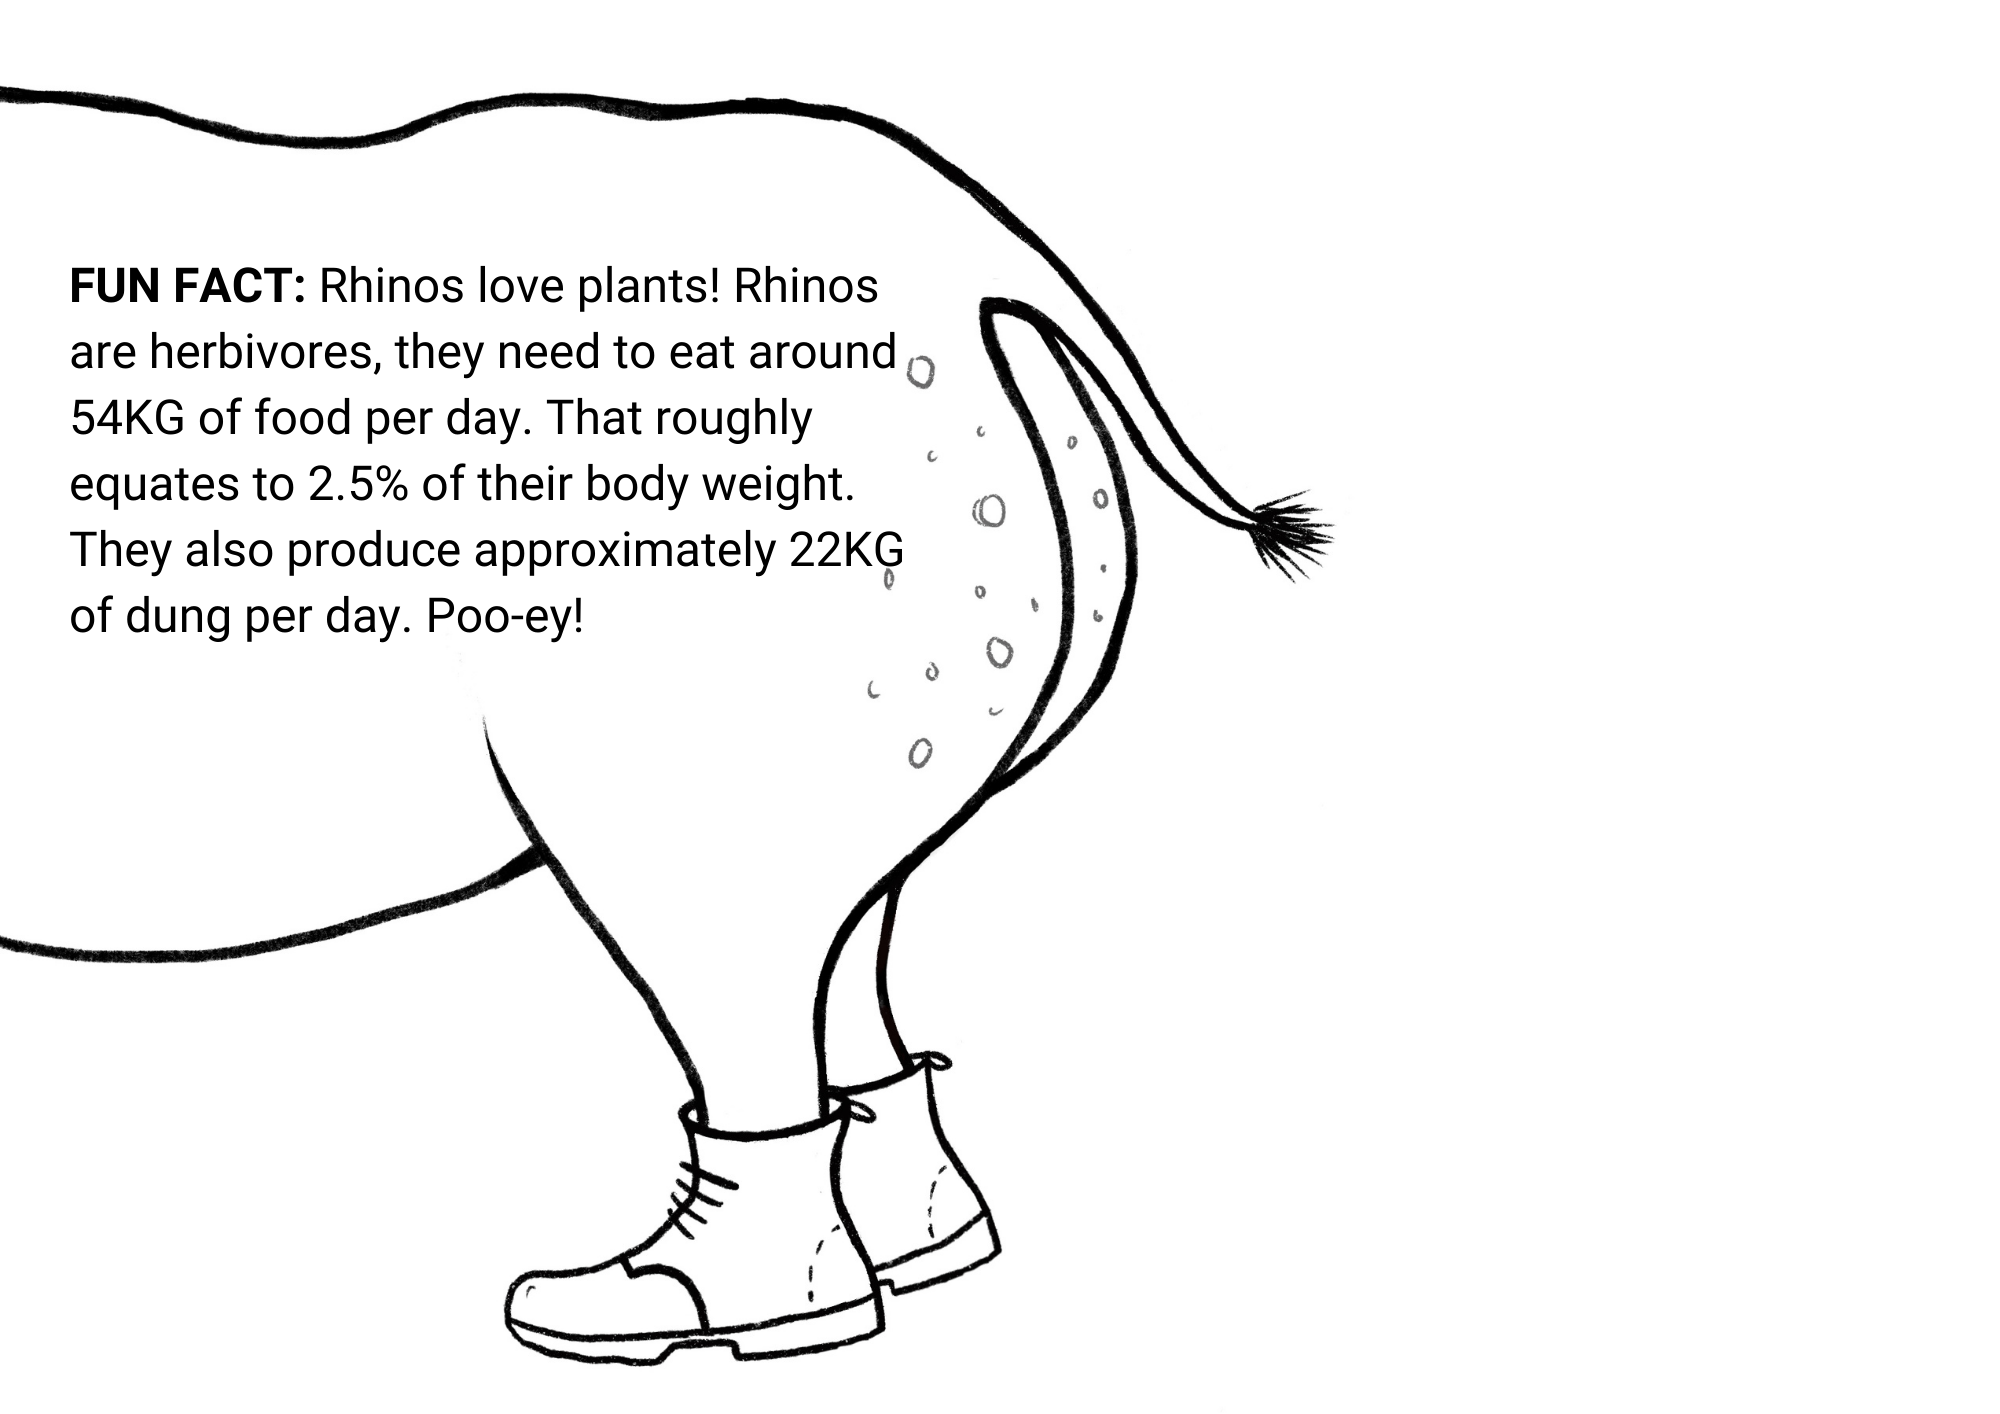 Illustration of a spotty rhino bum! It's wearing boots. Text over the top reads 'FUN FACT: Rhinos love plants! Rhinos are herbivores, they need to eat around 54KG of food per day. That roughly equates to 2.5% of their body weight. They also produce approximately 22KG of dung per day. Poo-ey!'